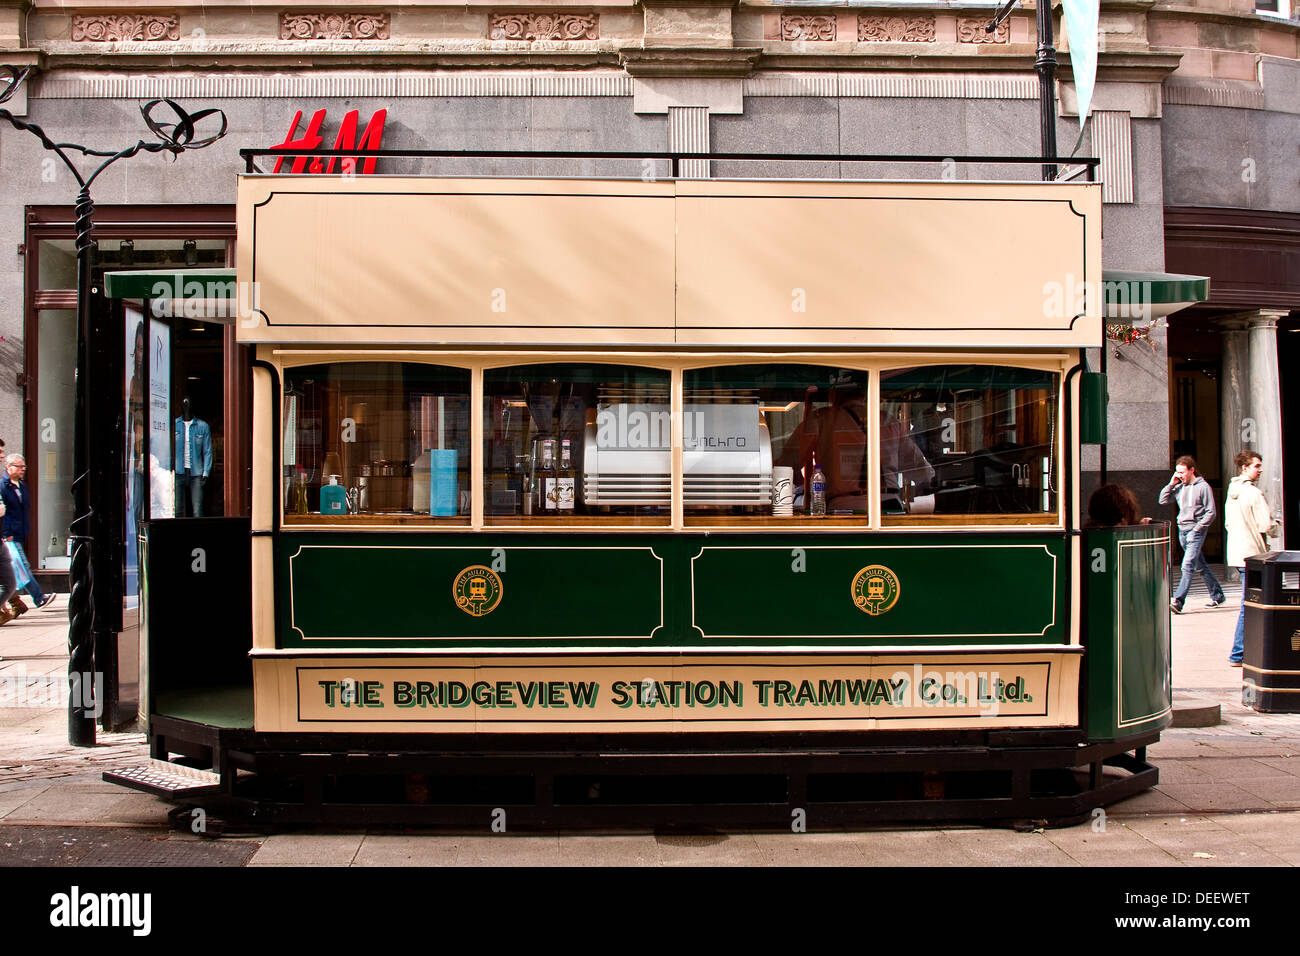 Bridgeview Station Tramway Co. Ltd Tram car outside the H&M retail store is  a small cafe catering for the people in Dundee, UK Stock Photo - Alamy